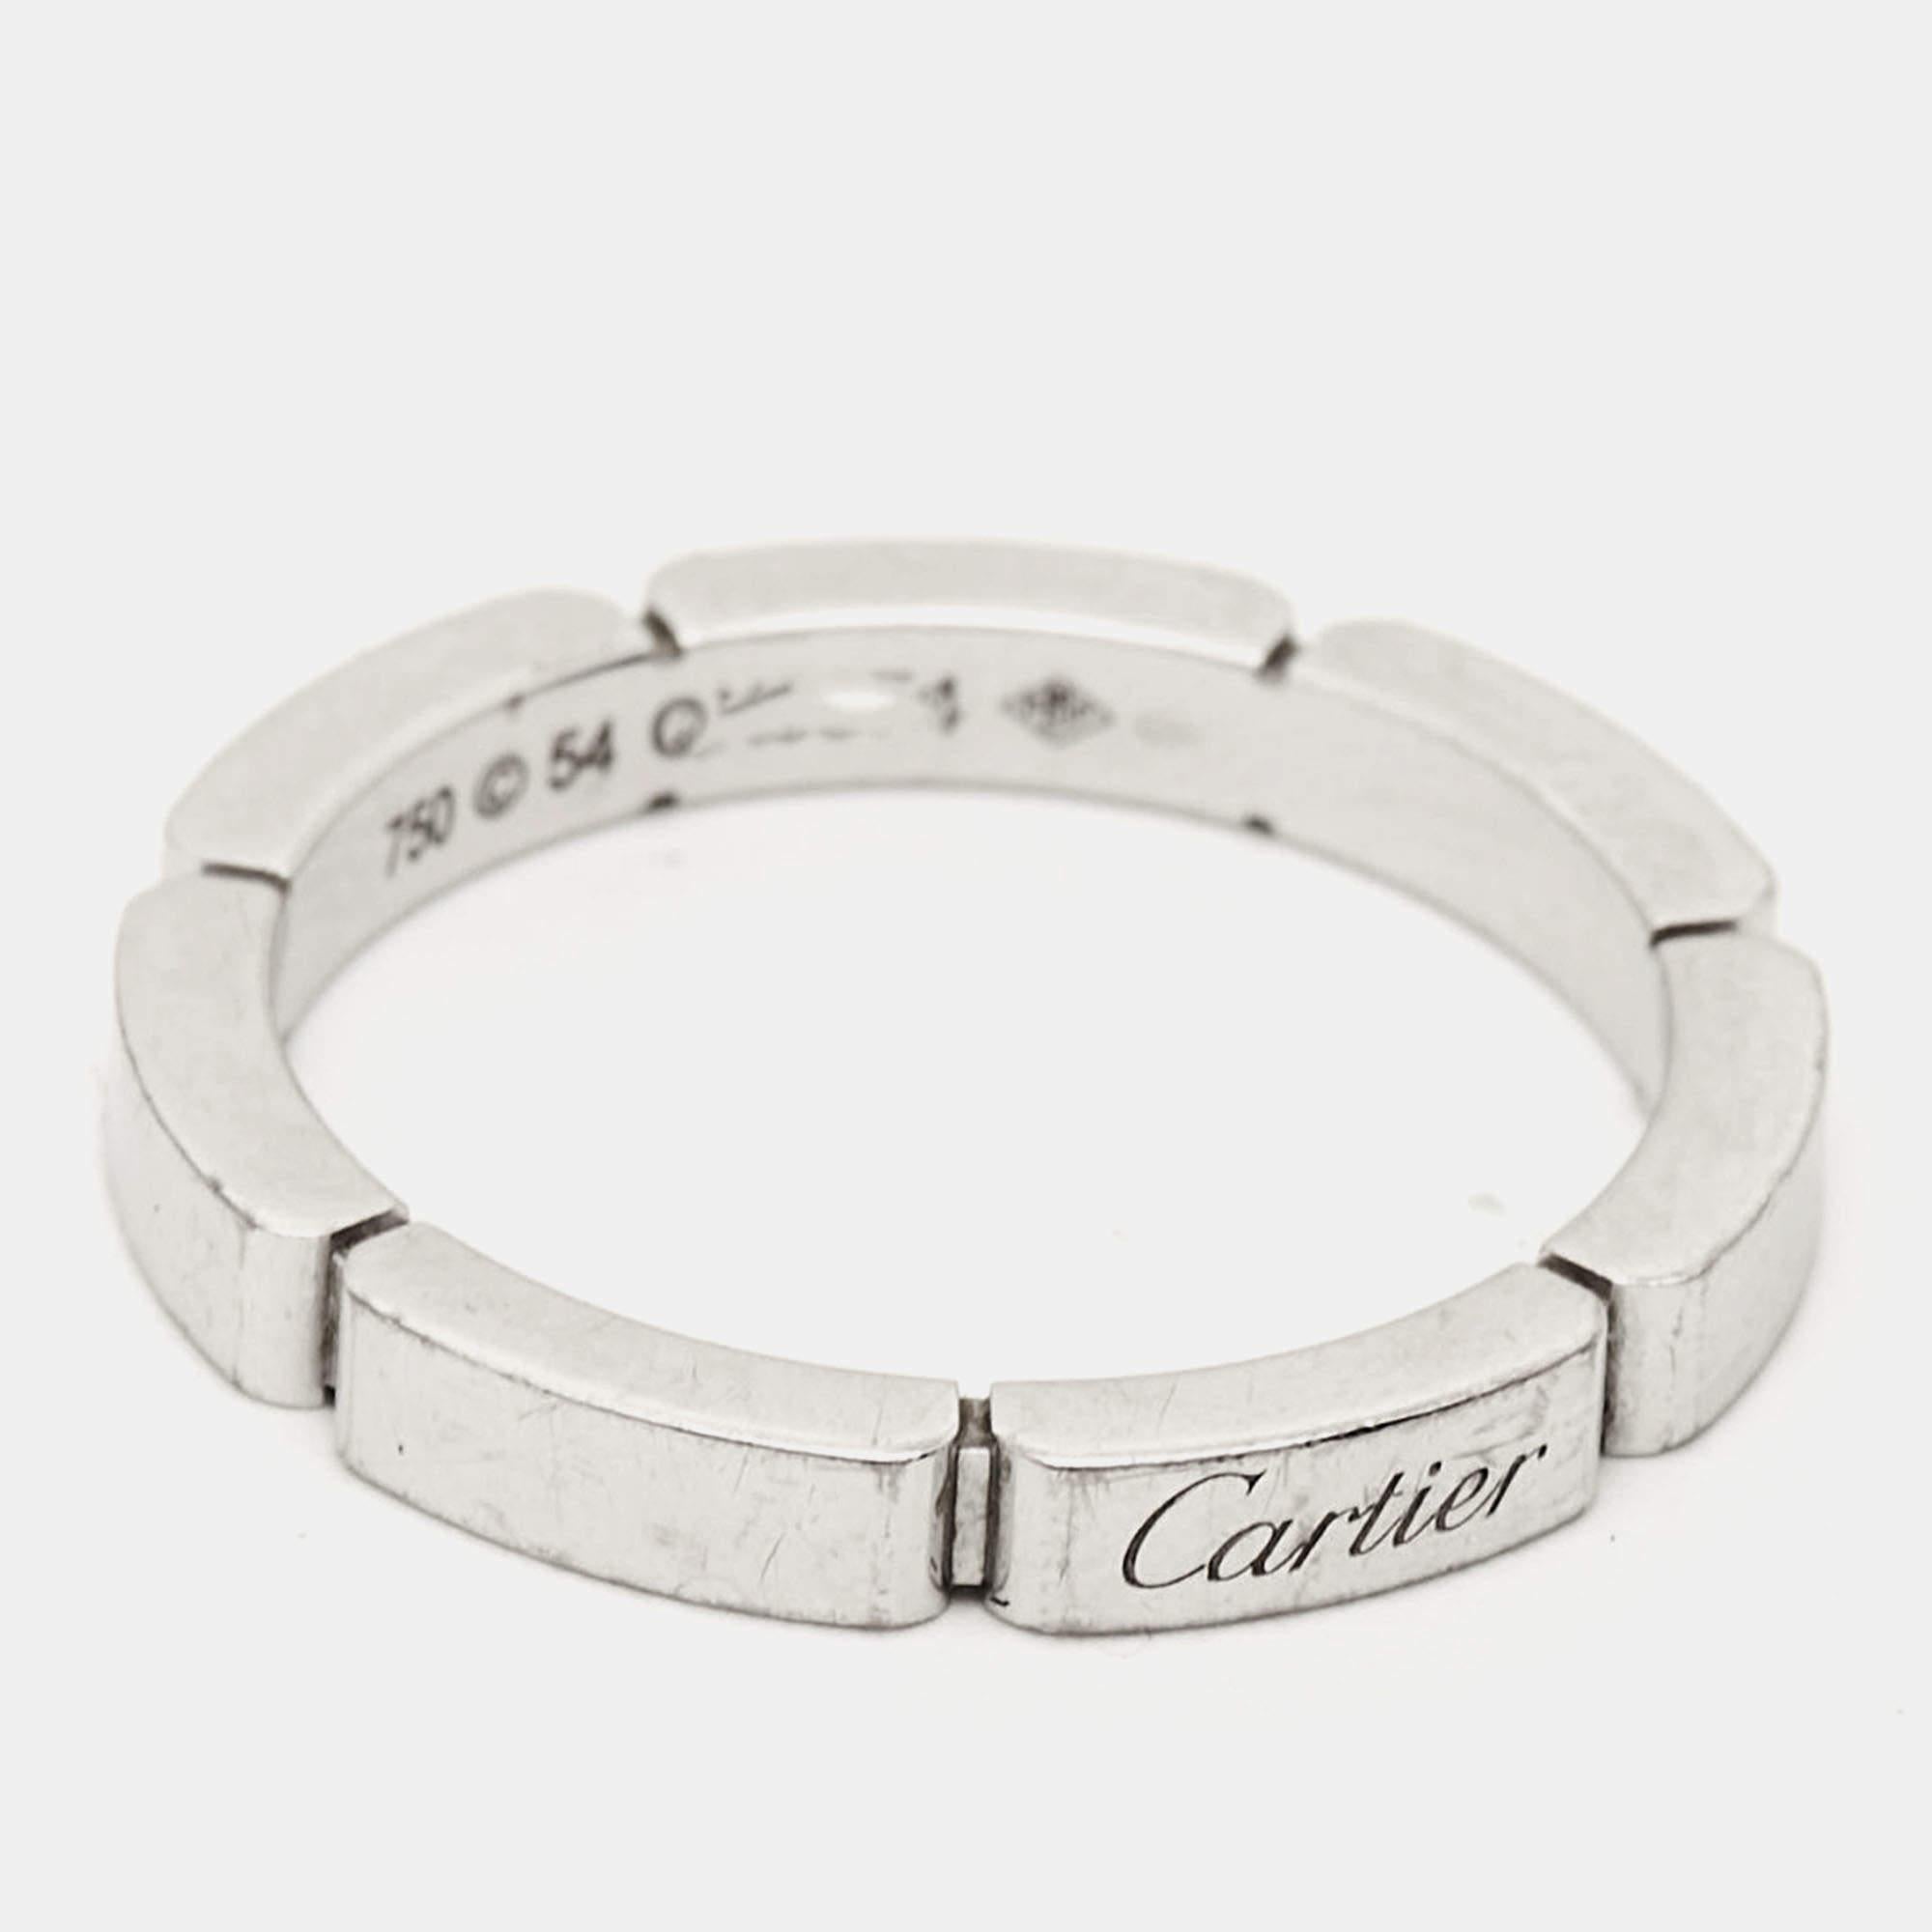 Cartier Mallion Panthere 18k White Gold Band Ring Size 54 In Fair Condition For Sale In Dubai, Al Qouz 2